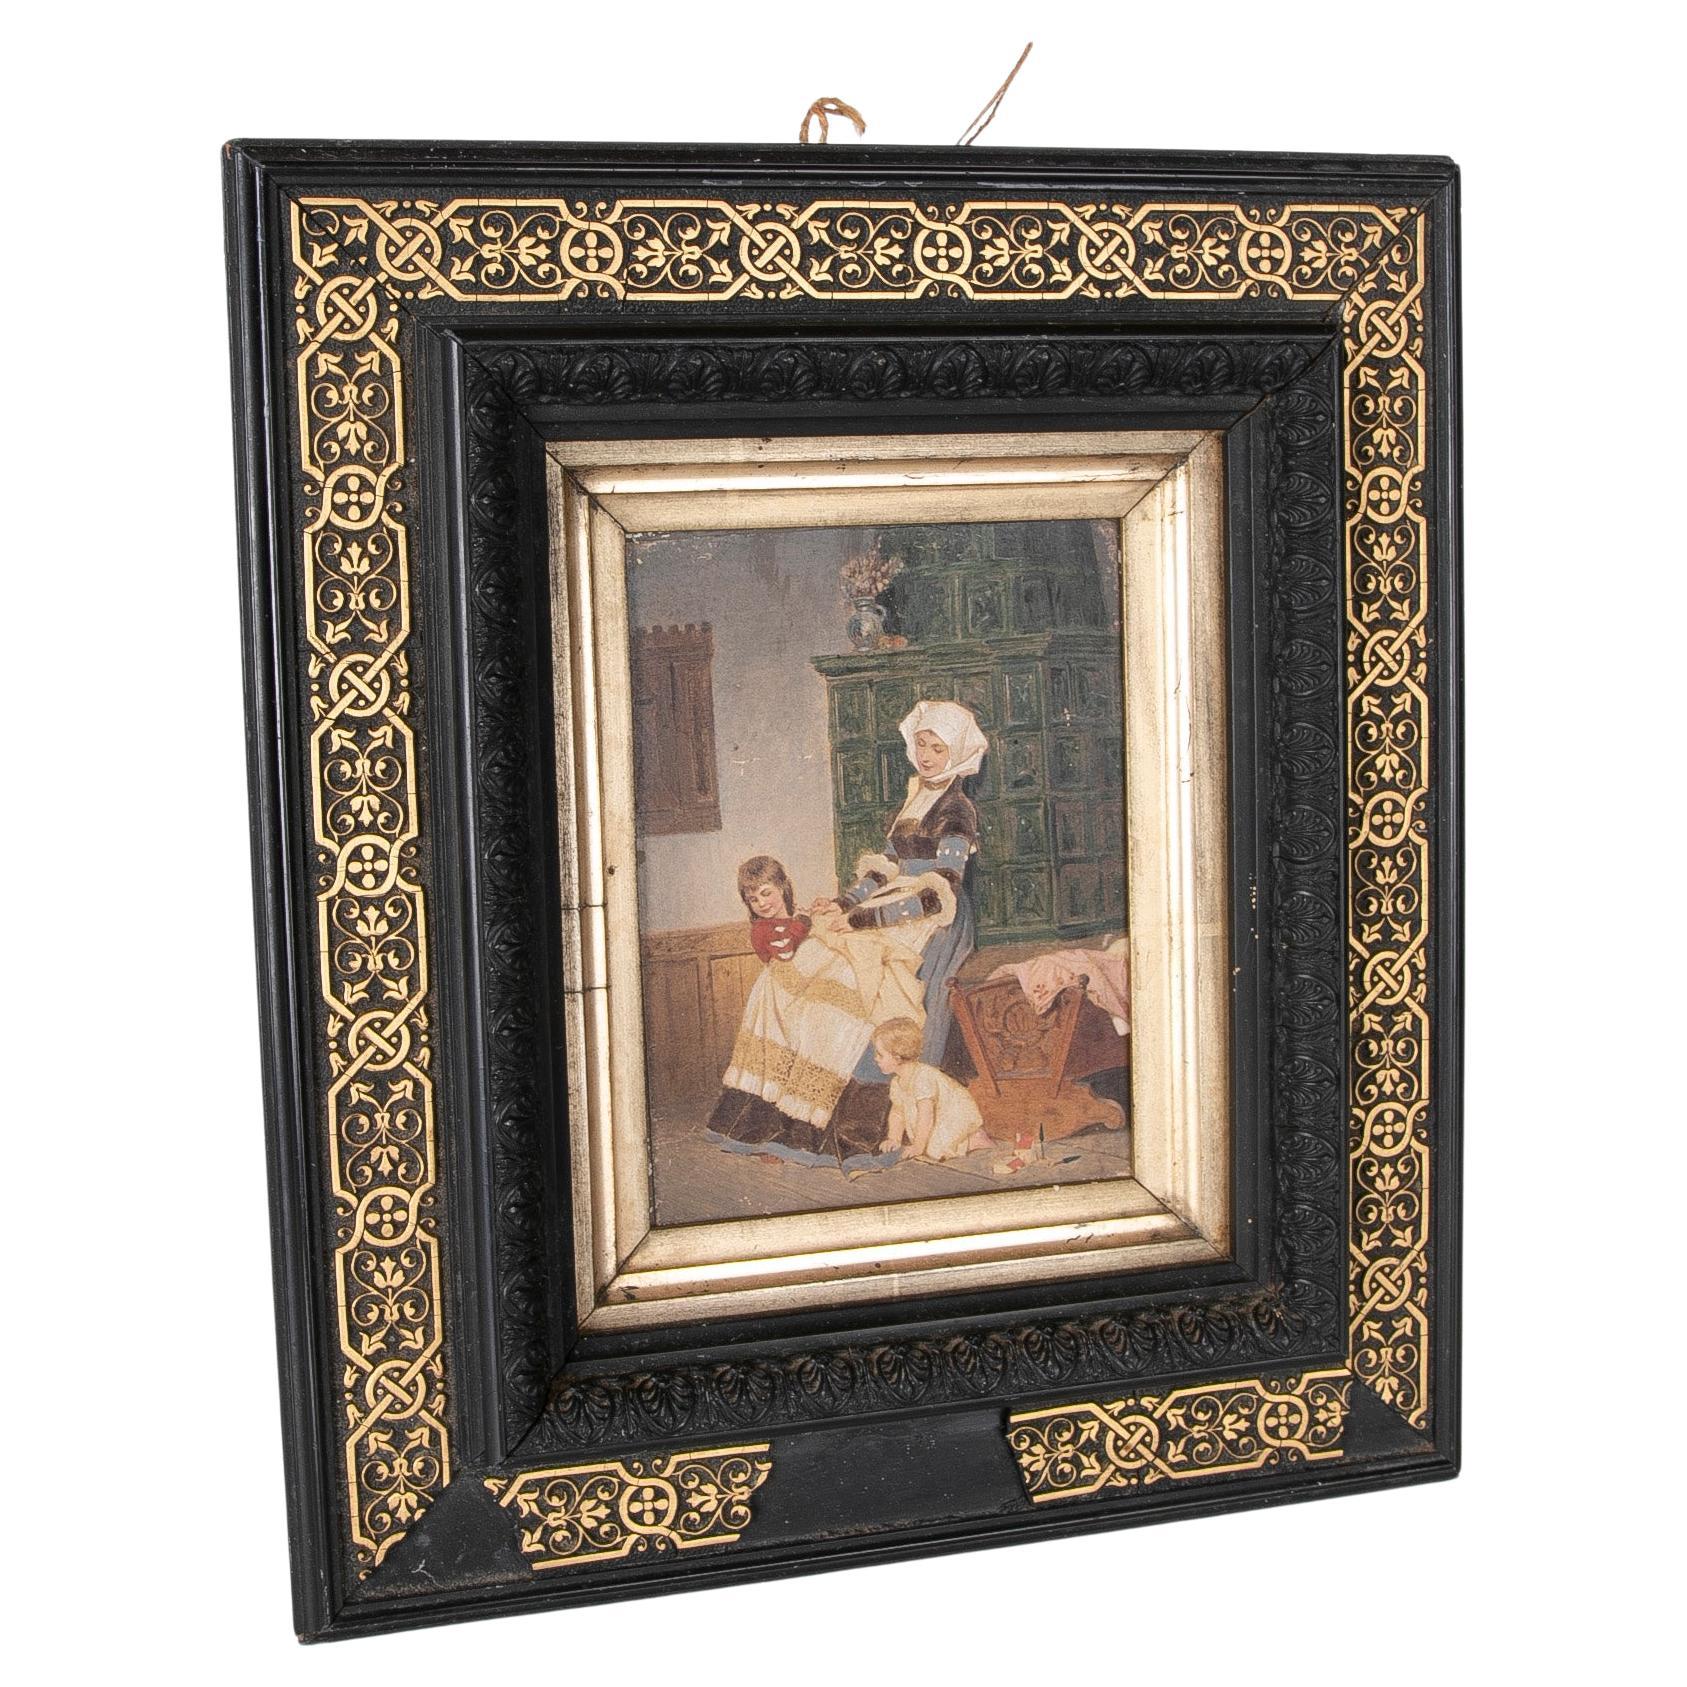 Painting of Traditional Scene Painted on Board with Antique Frame